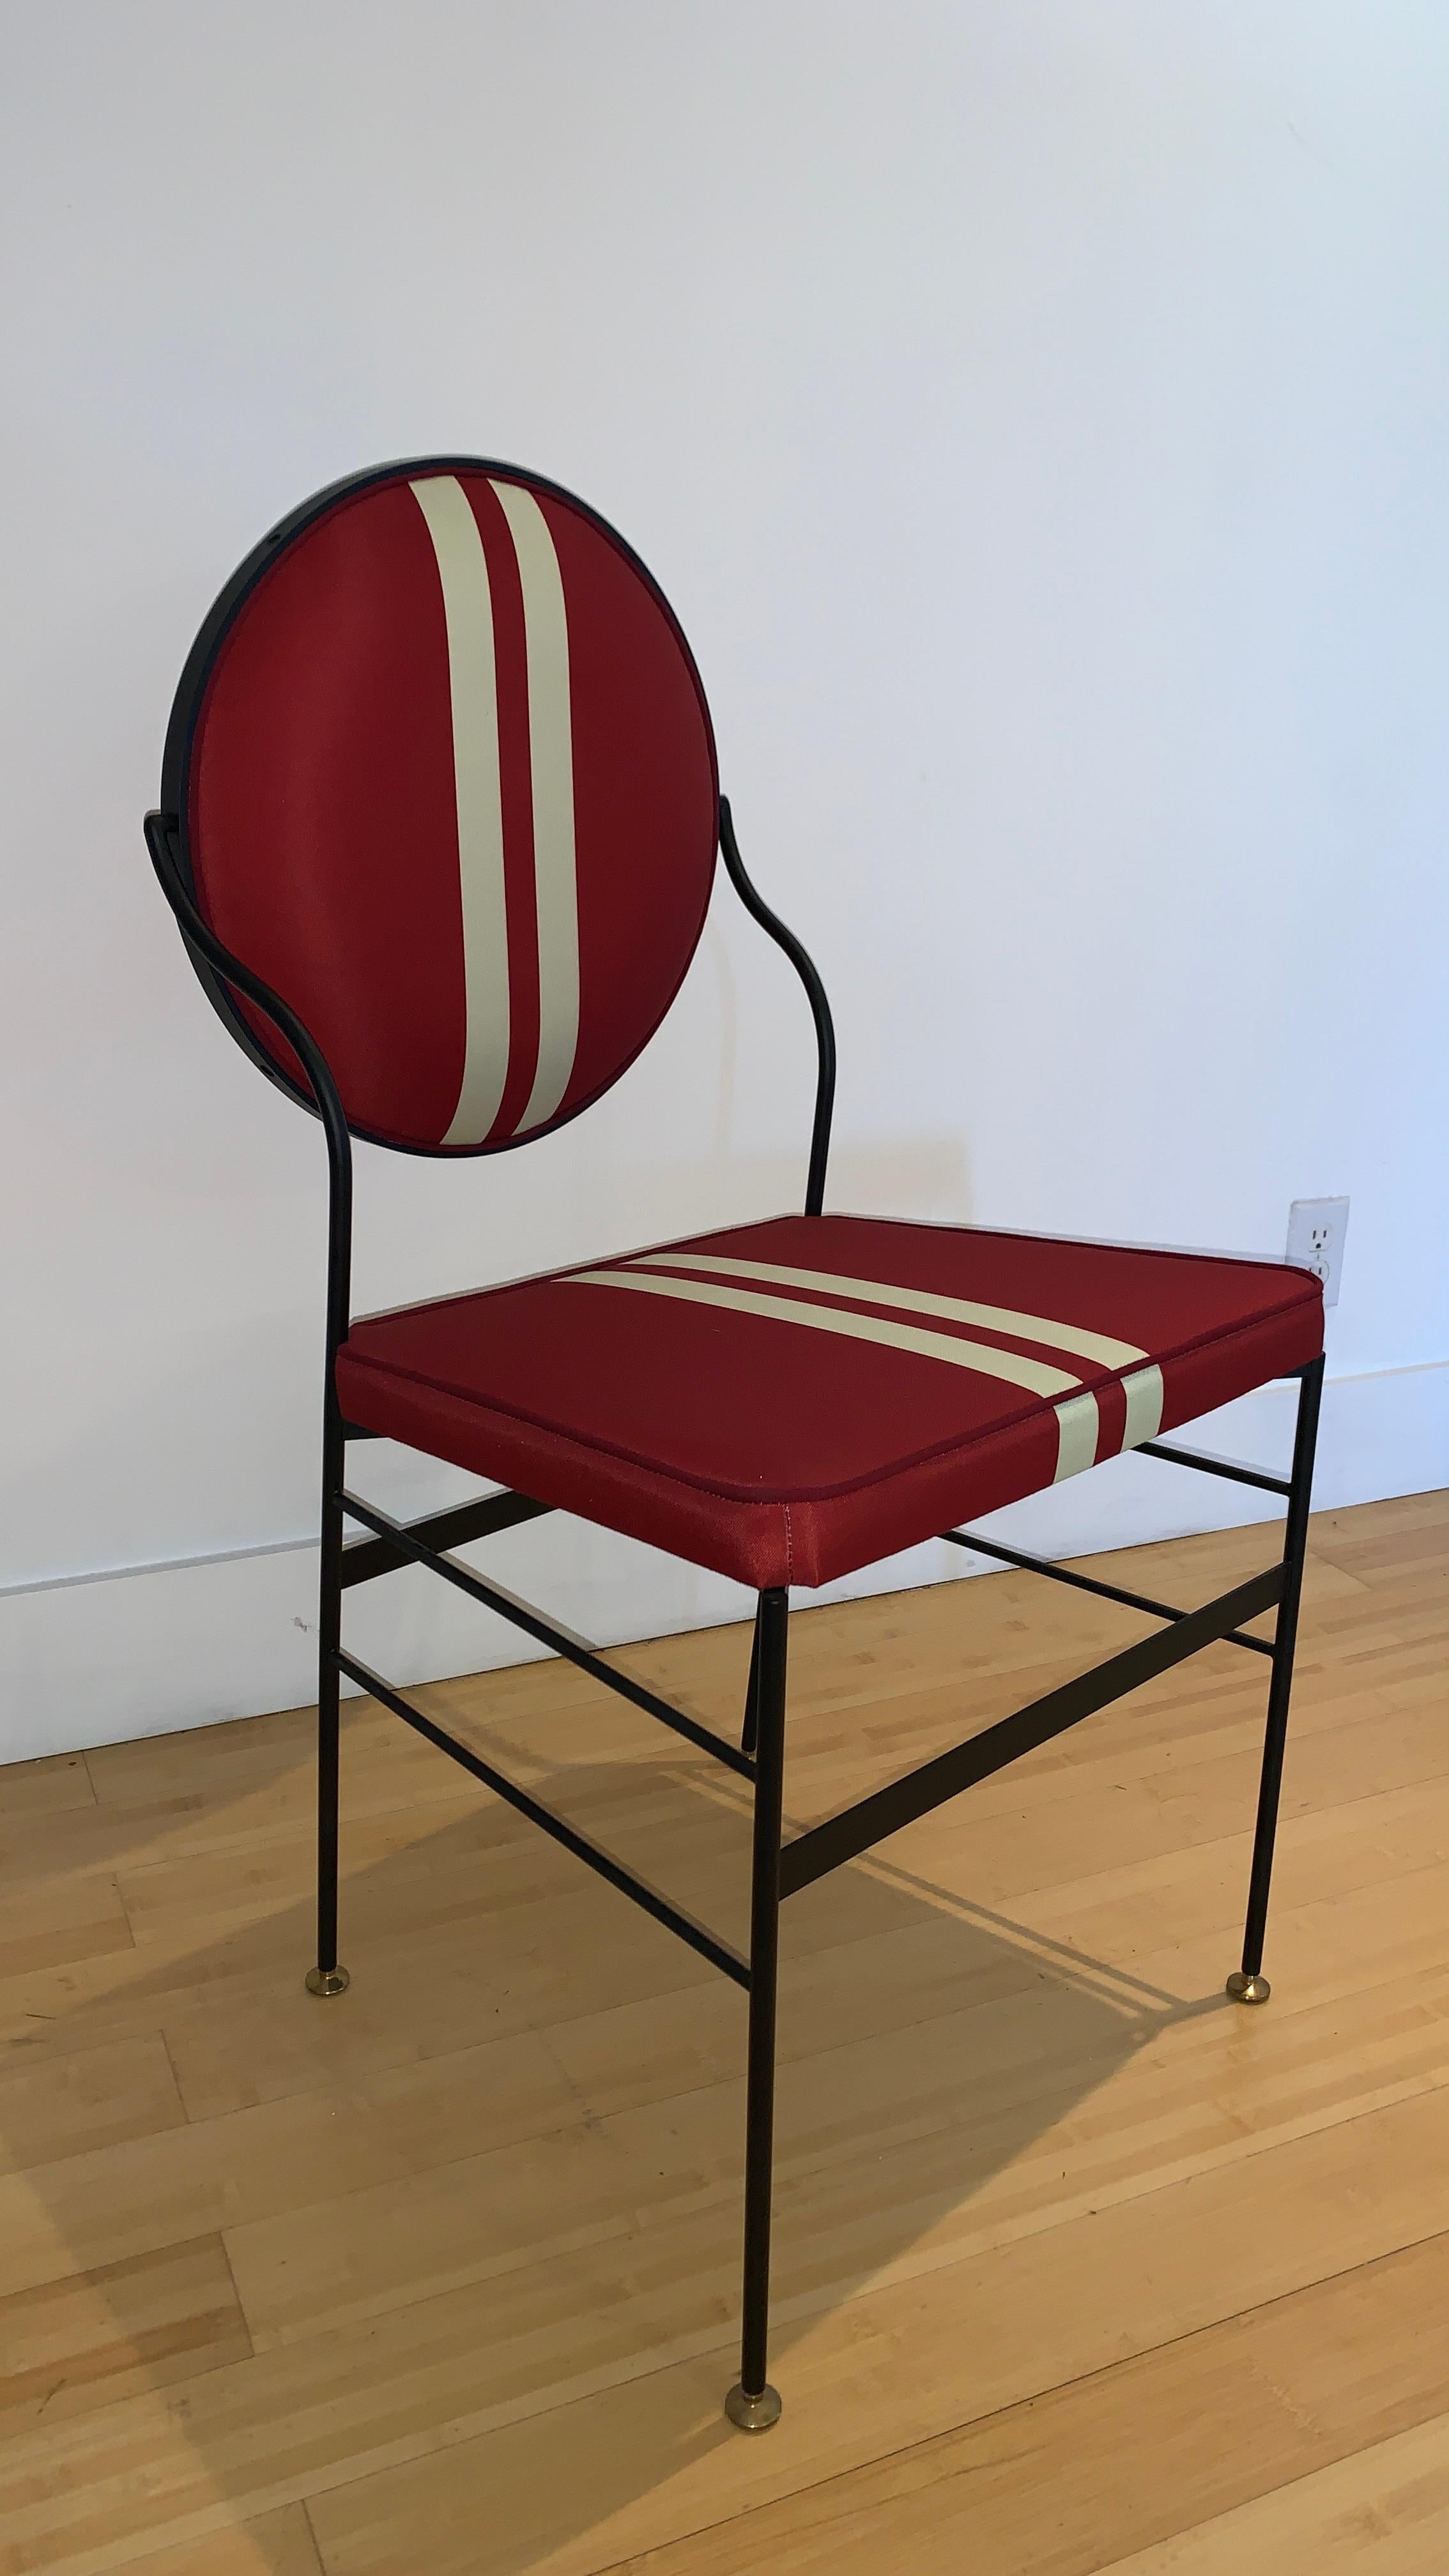 In Stock in Los Angeles, Luigina Red/White Sport Stripe Chair 1